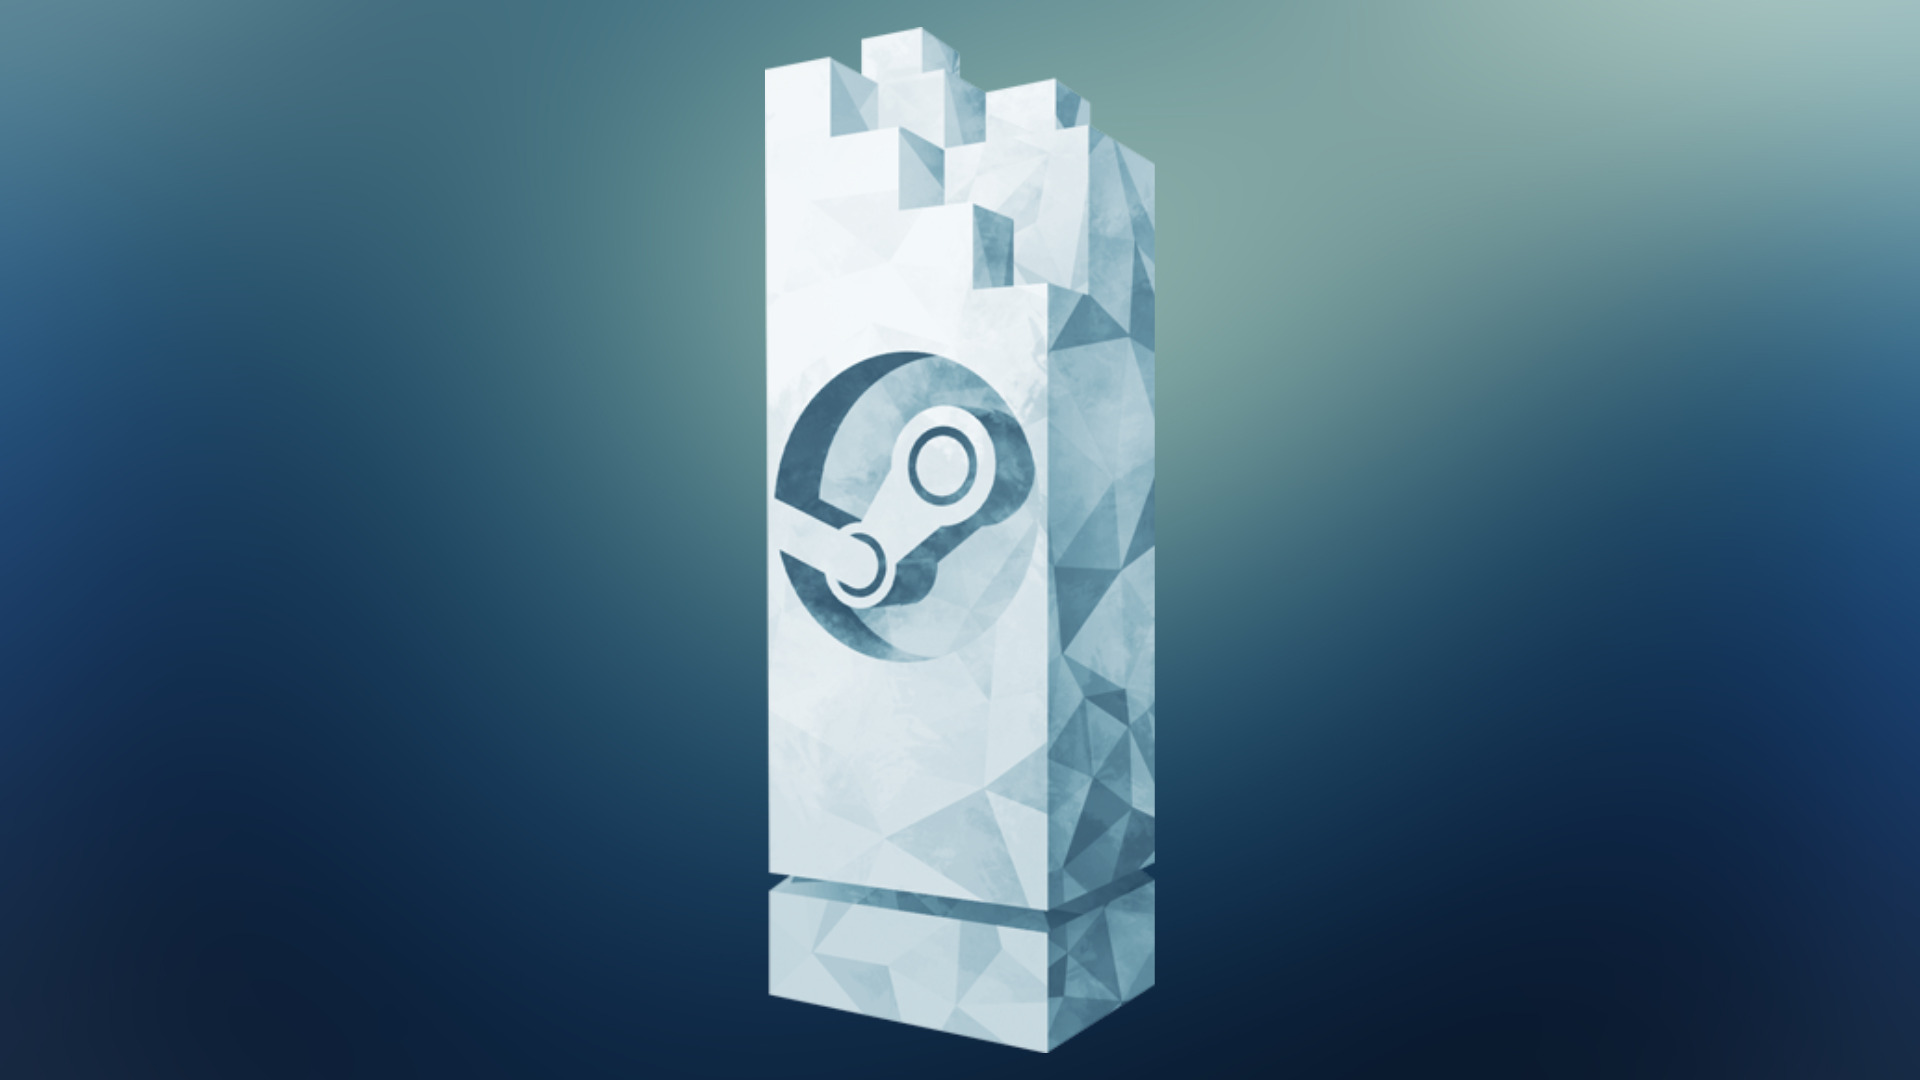 Here's the winners of the 2022 Steam Awards